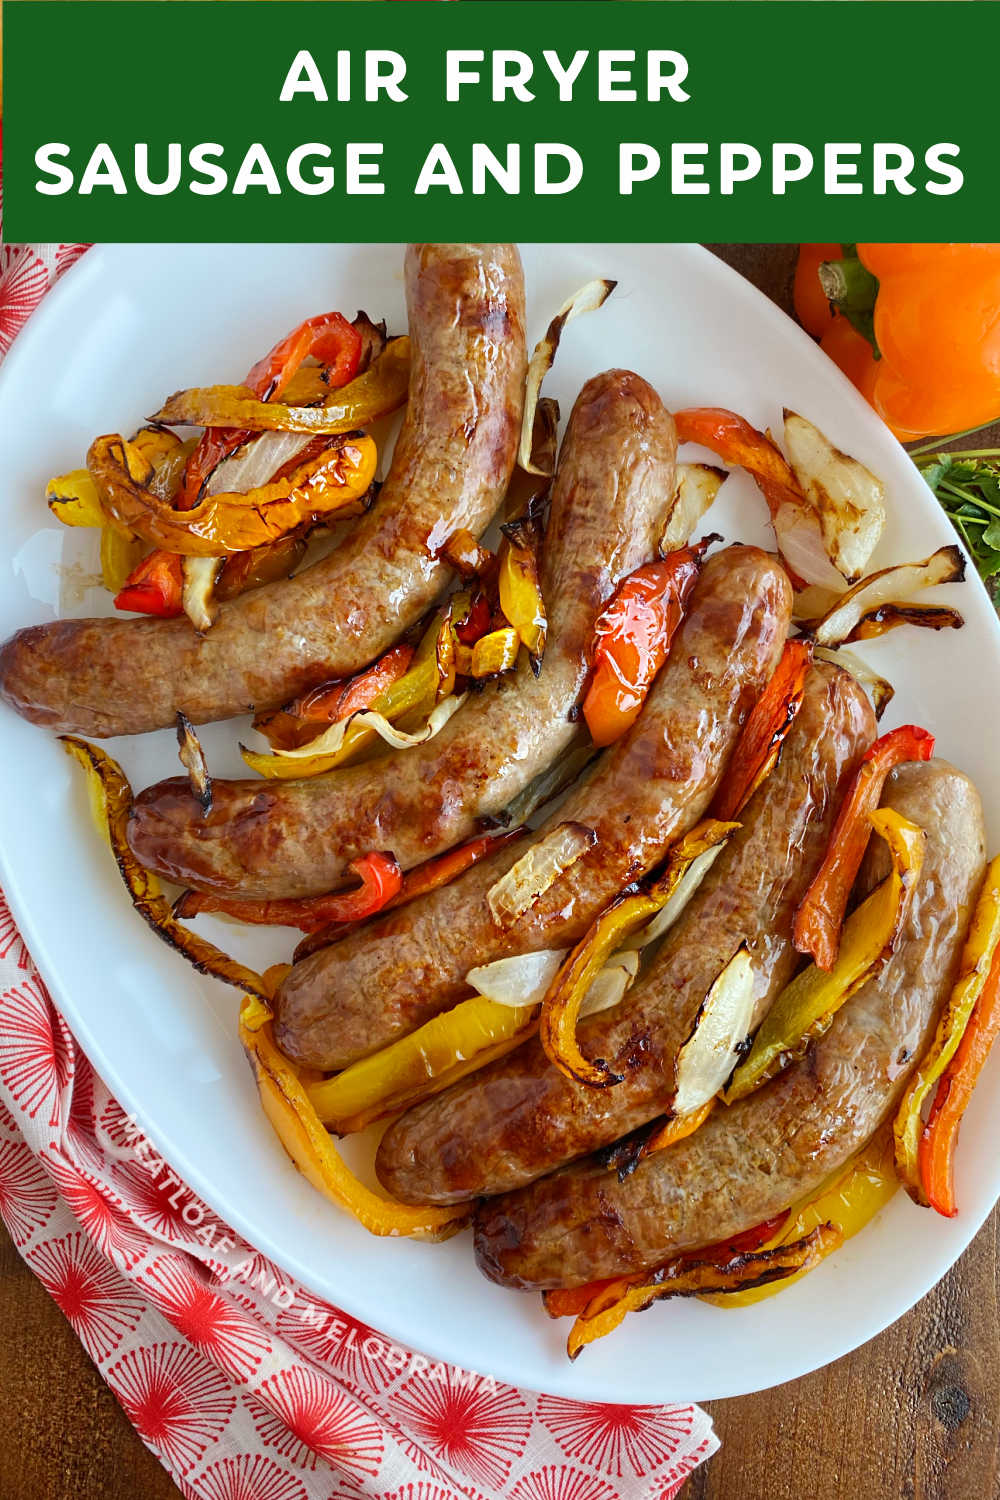 Air Fryer Sausage and Peppers recipe made with sweet Italian sausages, bell peppers and onions is a quick and easy dinner the whole family will love! This delicious meal takes about 30 minutes in your air fryer, plus it's low carb and keto friendly via @meamel